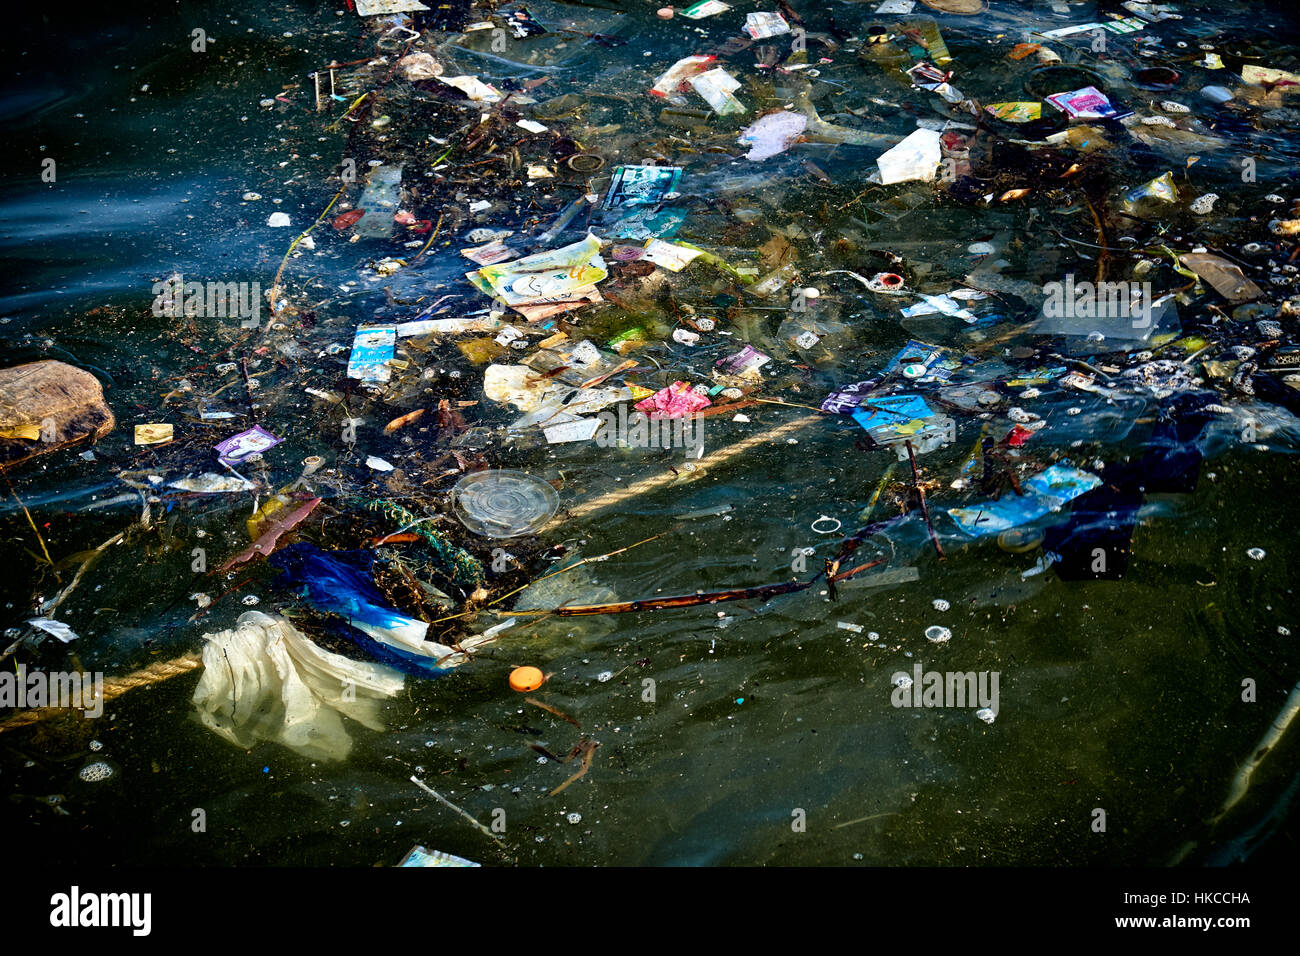 HONG KONG - MAY 25: Marine pollution around Hung Shing Ye beach on Lamma Island just off Hong Kong on May 25, 2014. In the summer and with prevailing  Stock Photo